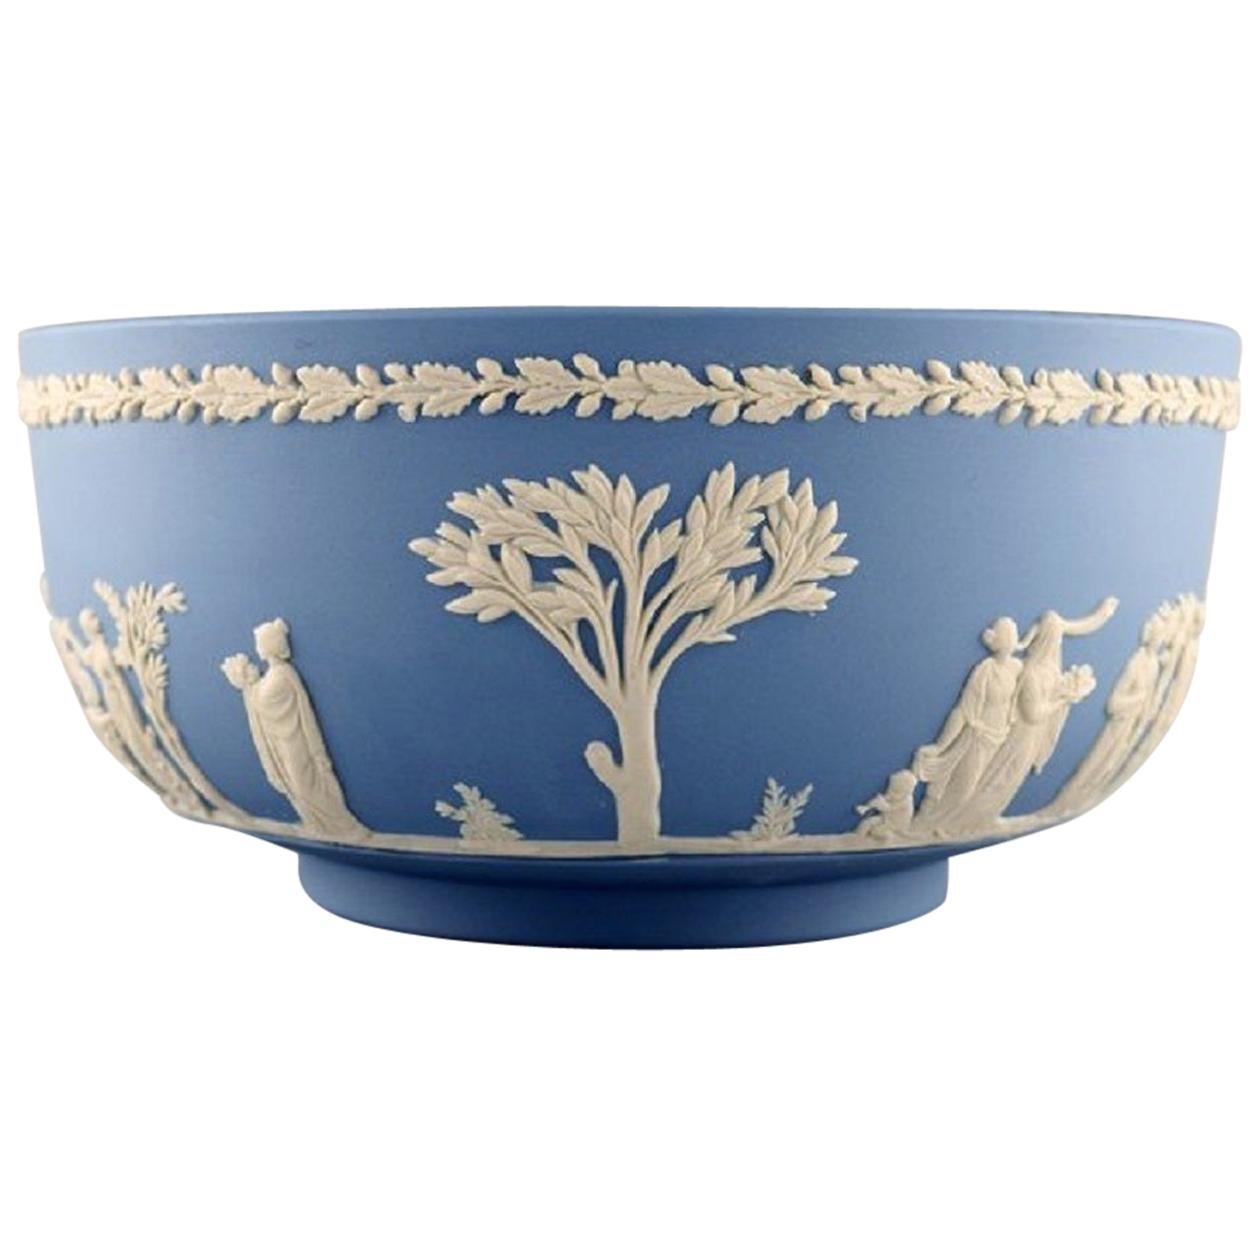 Wedgwood, England, Large Bowl in Light Blue Stoneware with Classicist Scenes